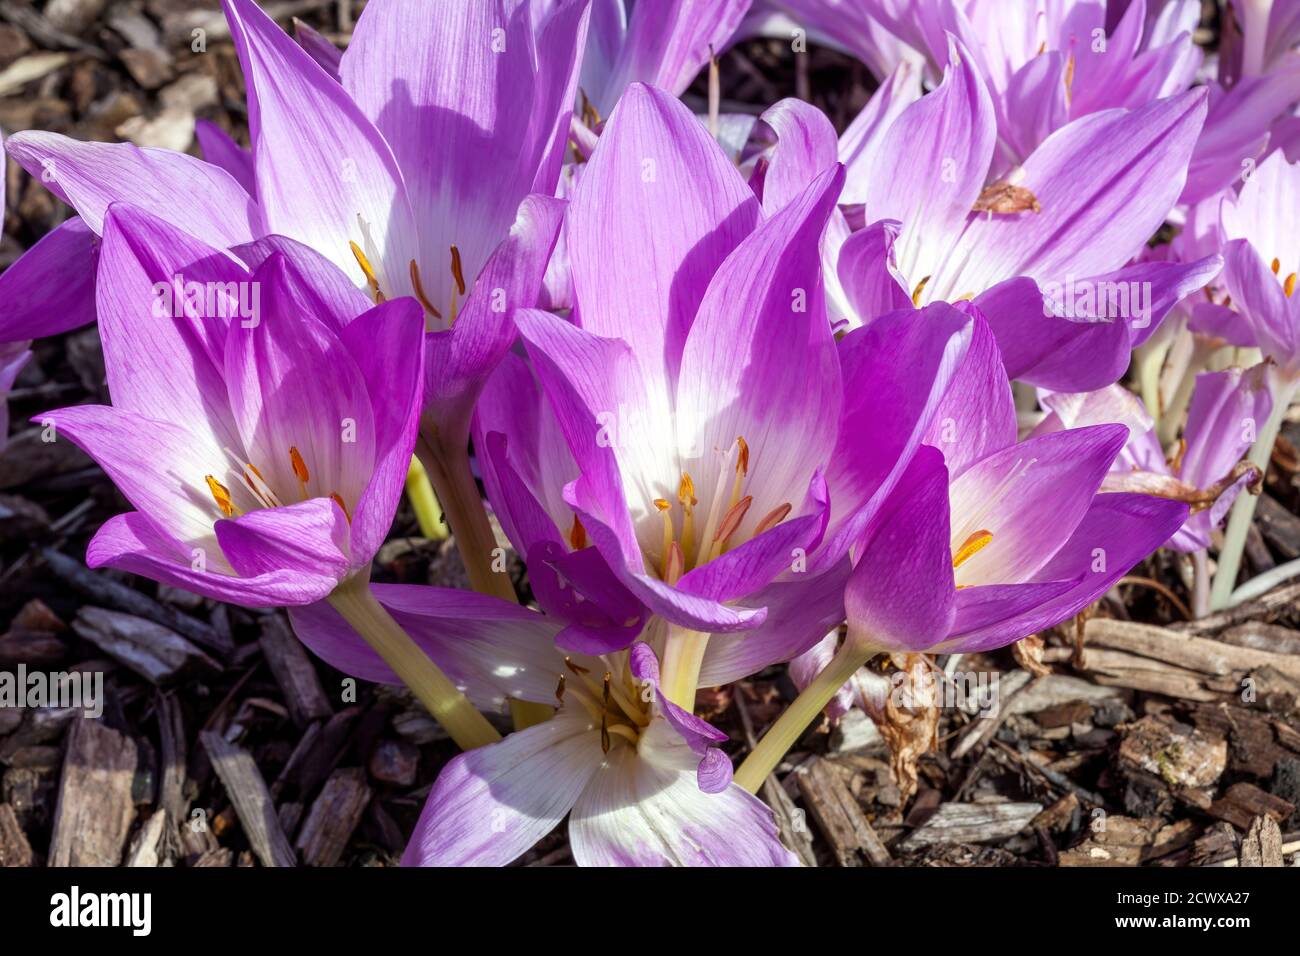 Colchicum autumnale 'Waterlily' an autumn fall flower bulb plant ...